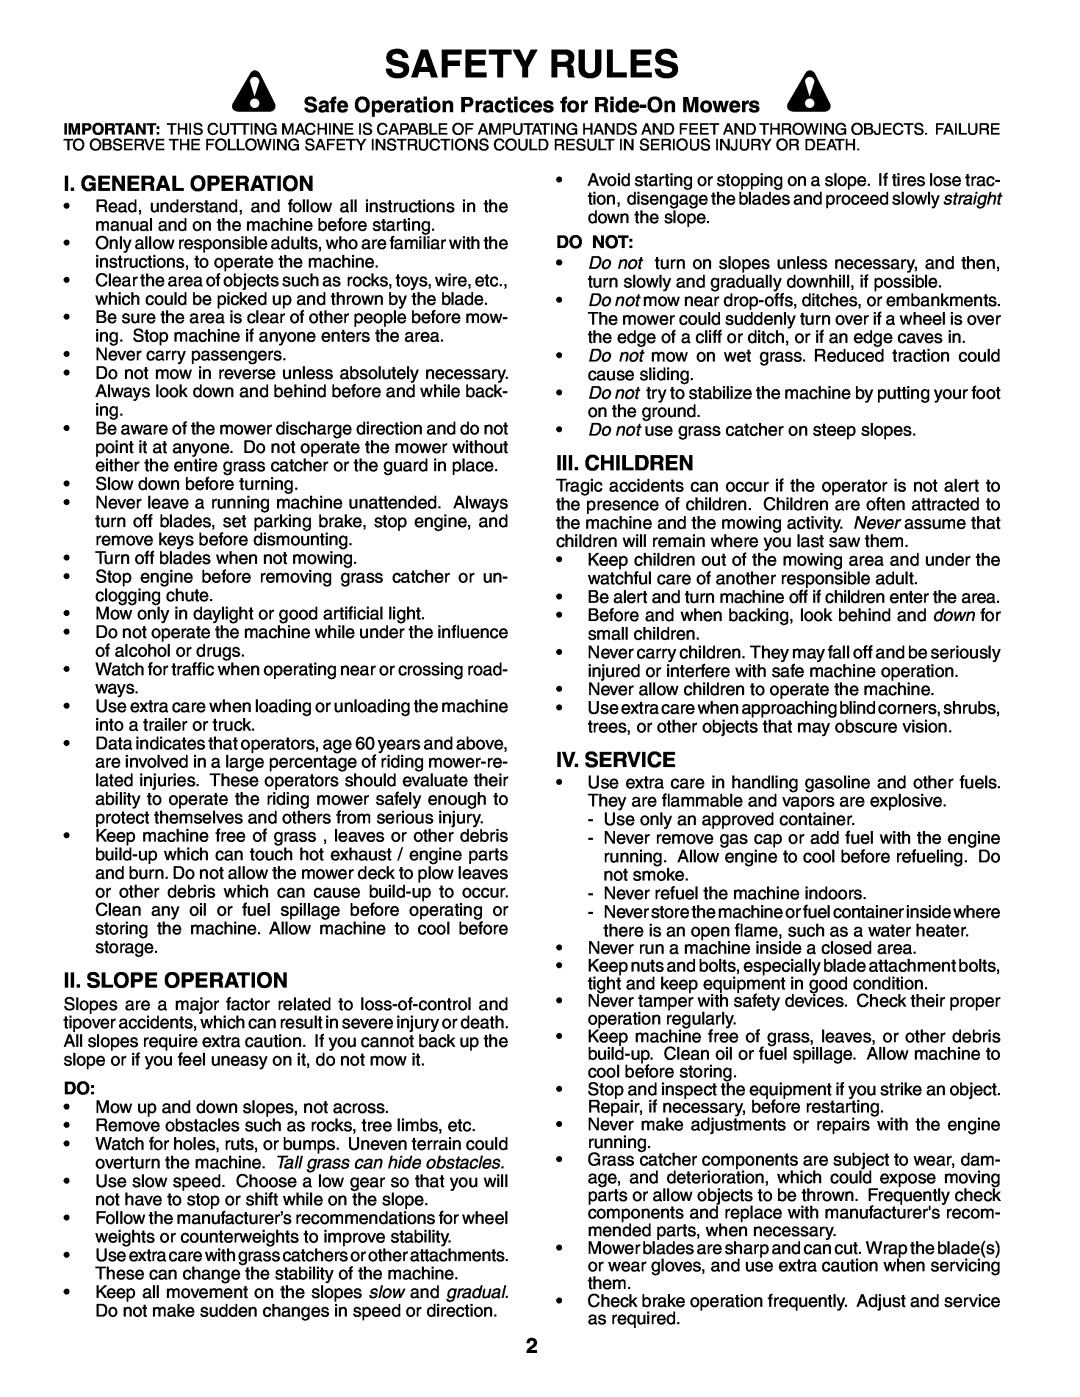 Weed Eater WE1338A Safety Rules, Safe Operation Practices for Ride-On Mowers, I. General Operation, Ii. Slope Operation 